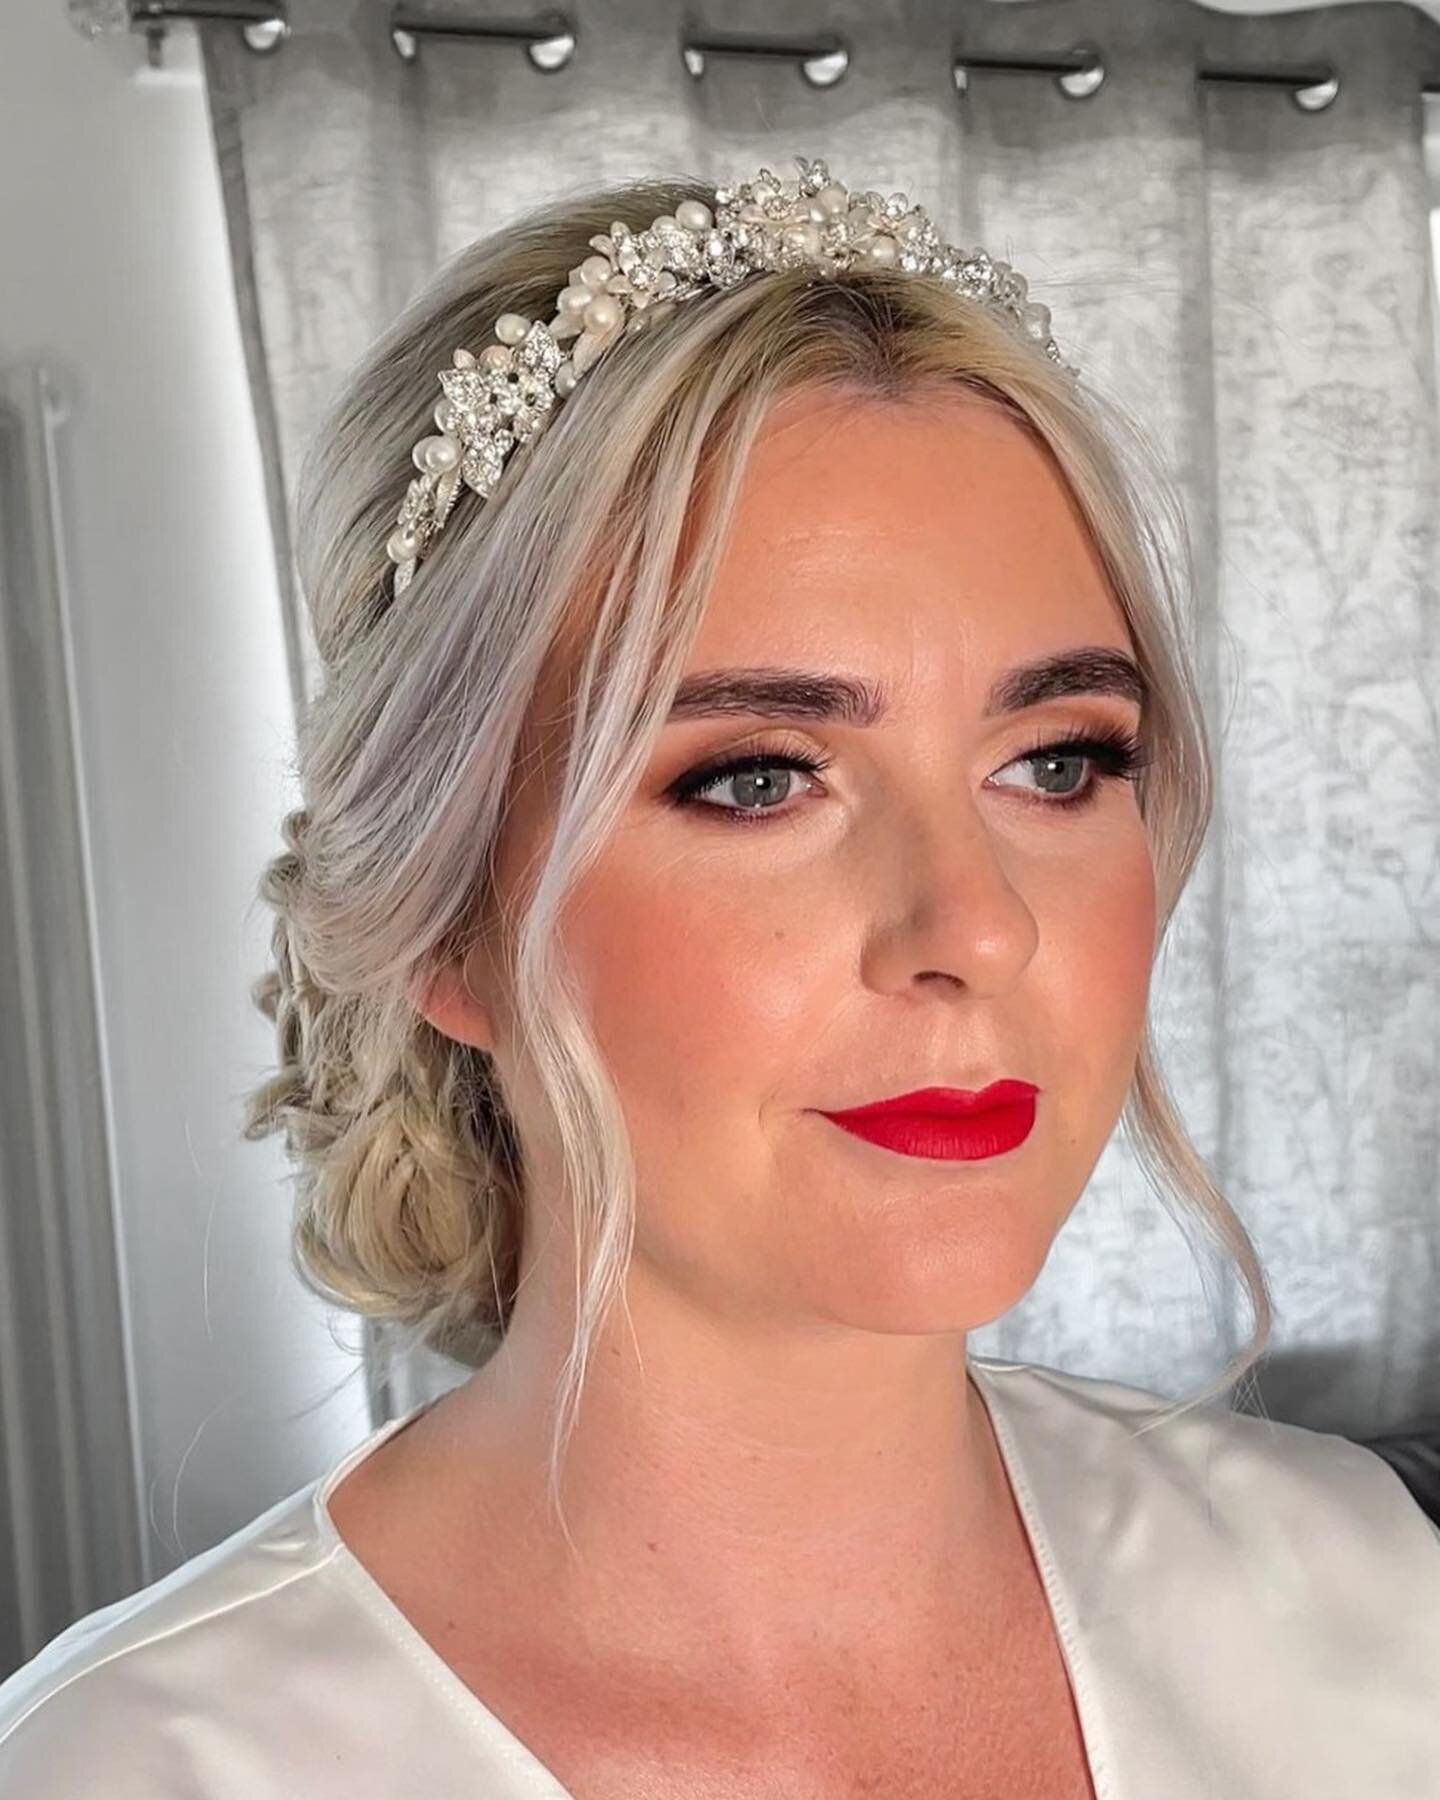 It&rsquo;s the classic red lip for me 🤌🏼☺️ 

#bridal #bridalmakeup #bridalmakeupartist #bridalmakeuplook #makeupartistyorkshire #bridalmakeupuk